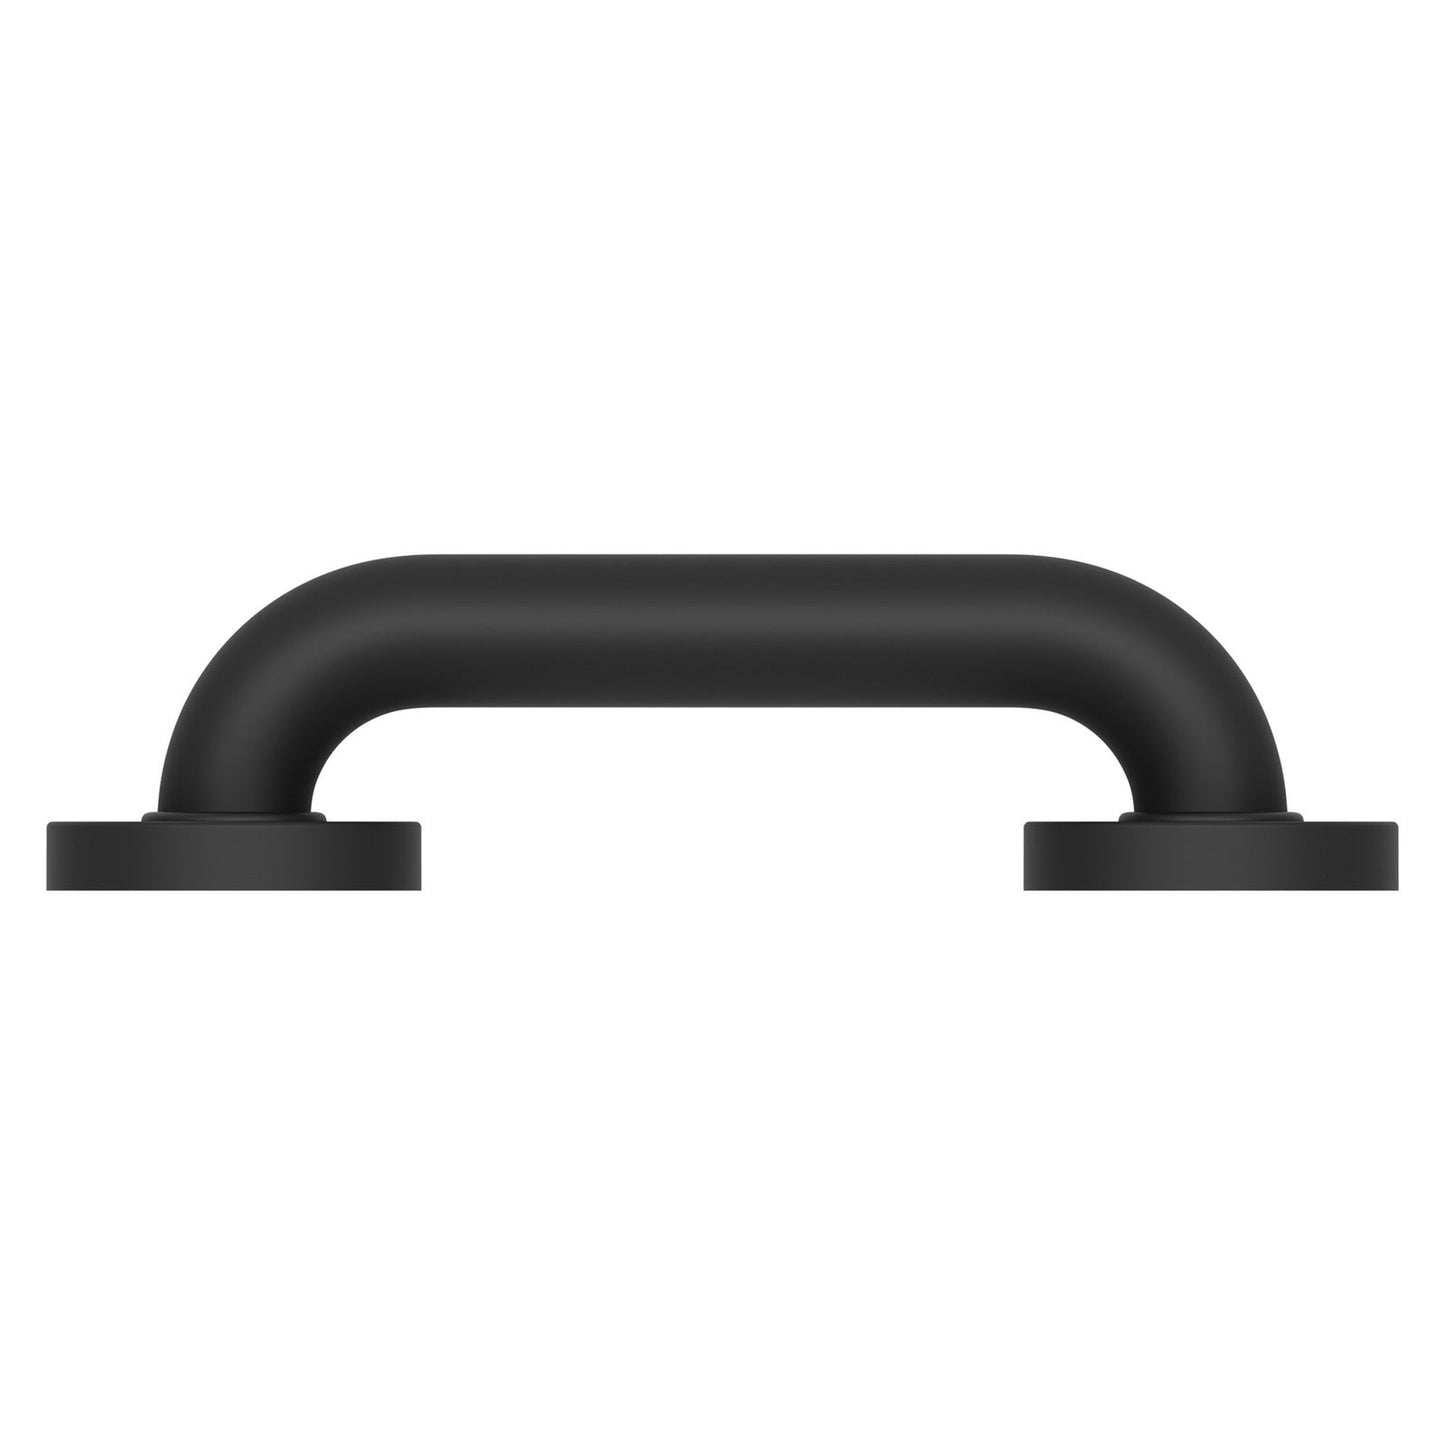 Evekare 8" x 1.25" Stainless Steel Concealed Mount Grab Bar With Comfort Grip Coating in Matte Black